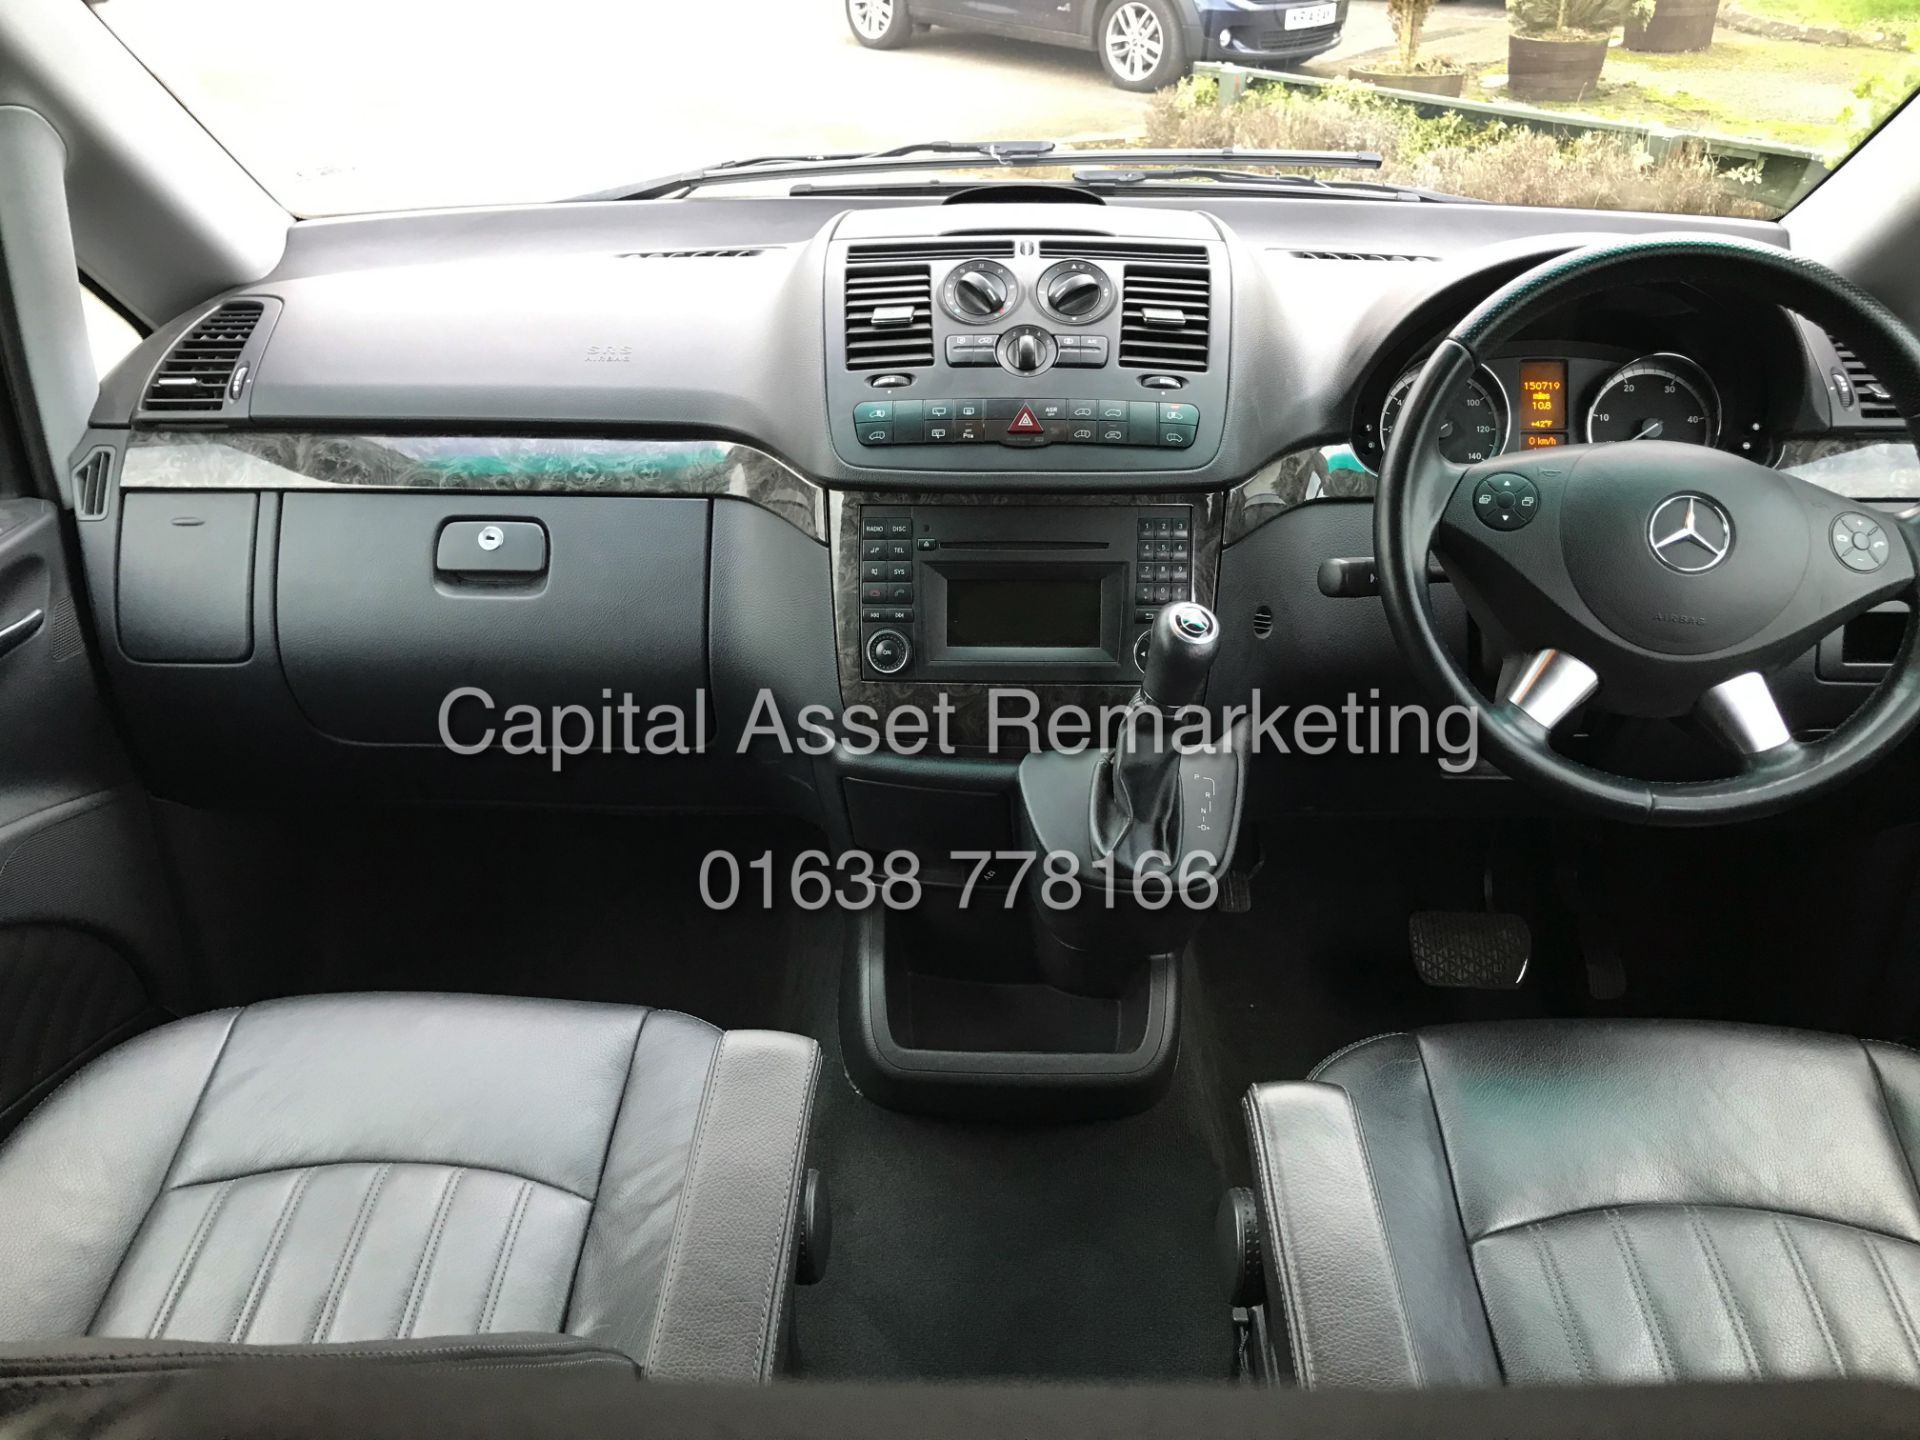 (ON SALE) MERCEDES VIANO 2.2CDI "AMBIENET" XLWB 8 SEATER (14 REG) 1 OWNER - FULLY LOADED - LEATHER - Image 12 of 28